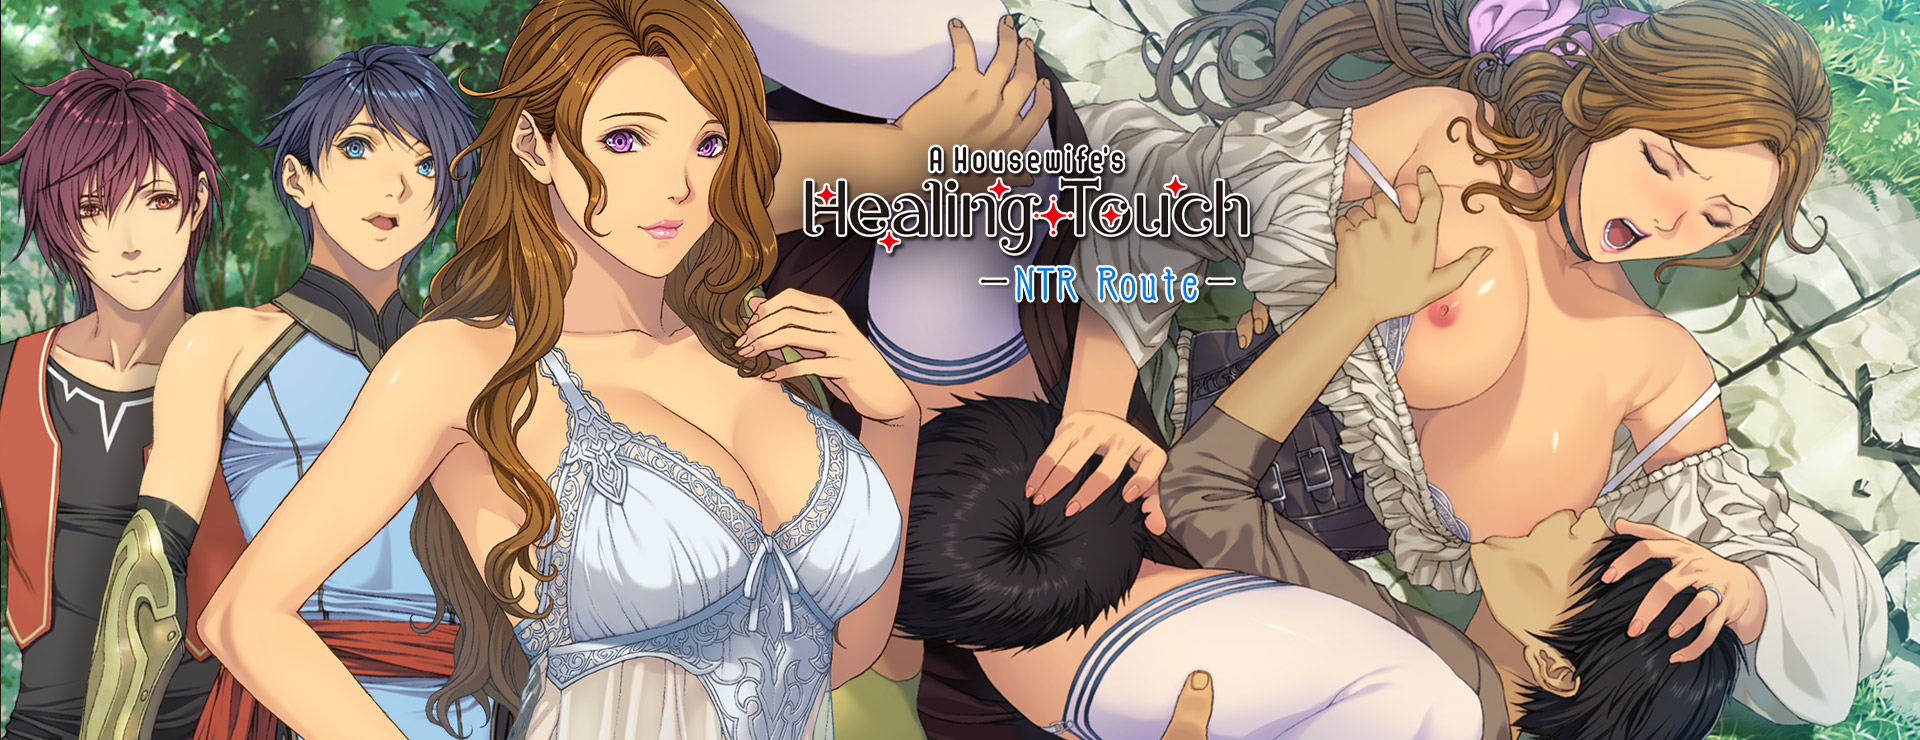 A Housewife's Healing Touch (NTR Route) - Action Adventure Spiel